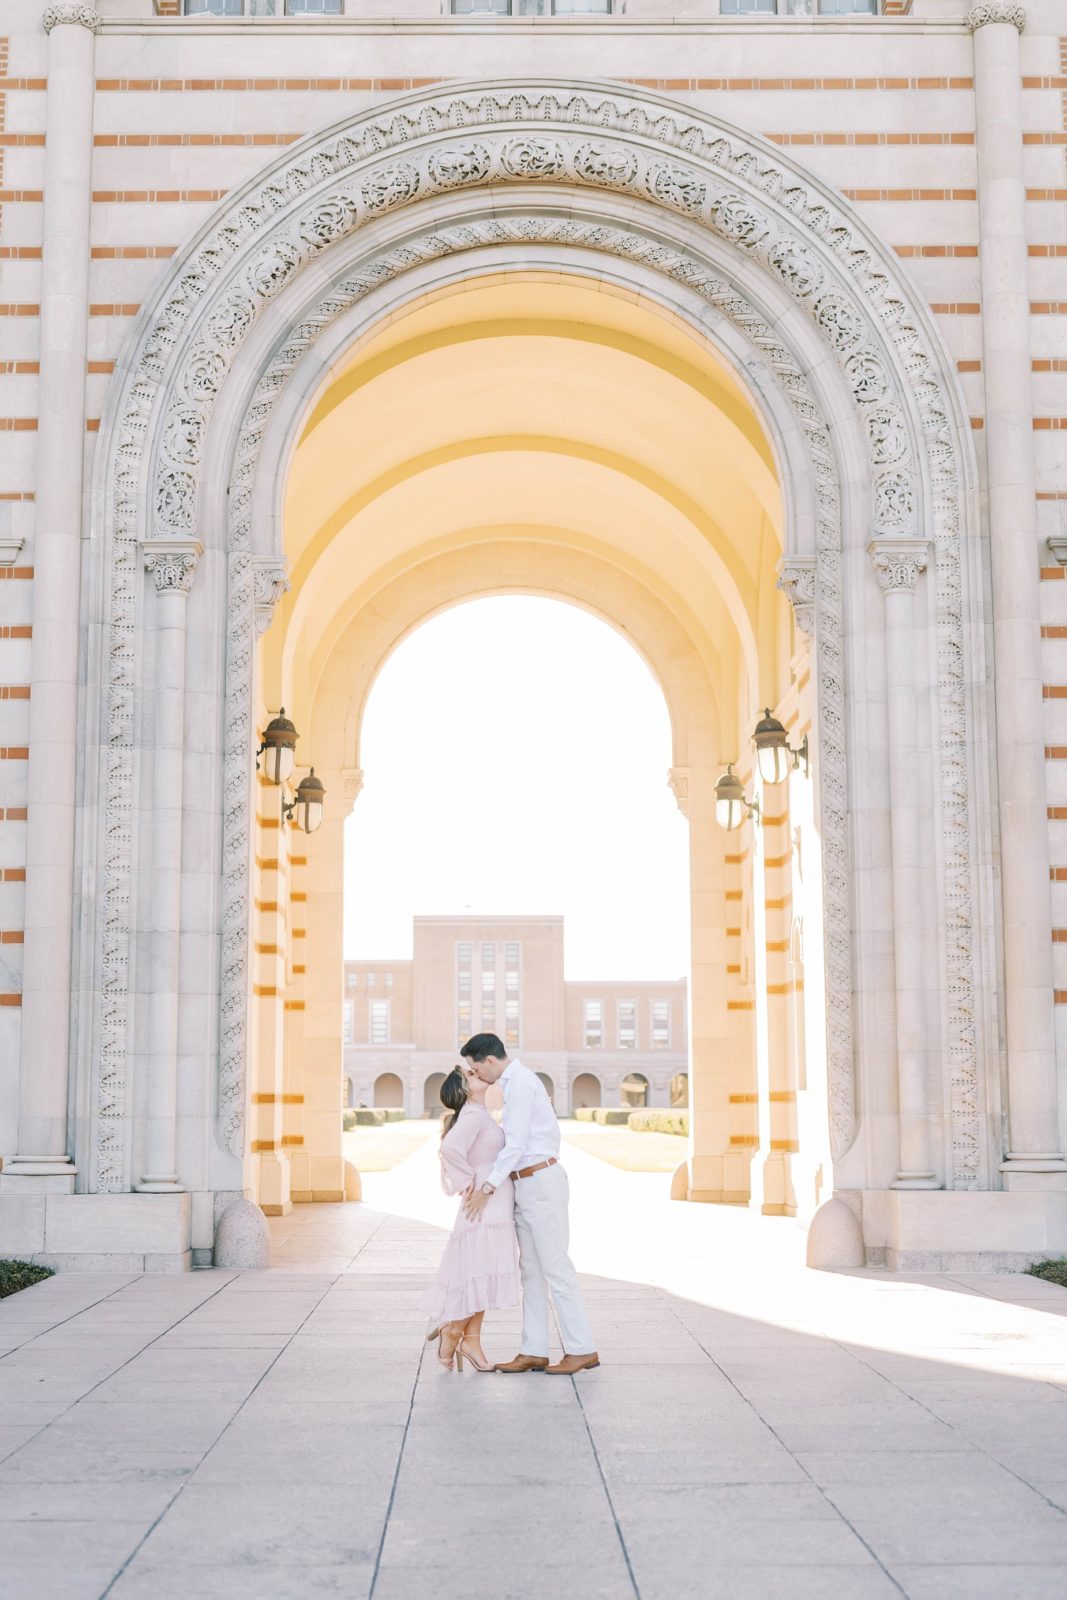 Under stone archways at Rice University a couple kisses by Christina Elliott Photography. engagement locations in Houston #christinaelliottphotography #Houstonengagements #riceuniversity #springengagements #sayIdo #Houstonengagementphotographers